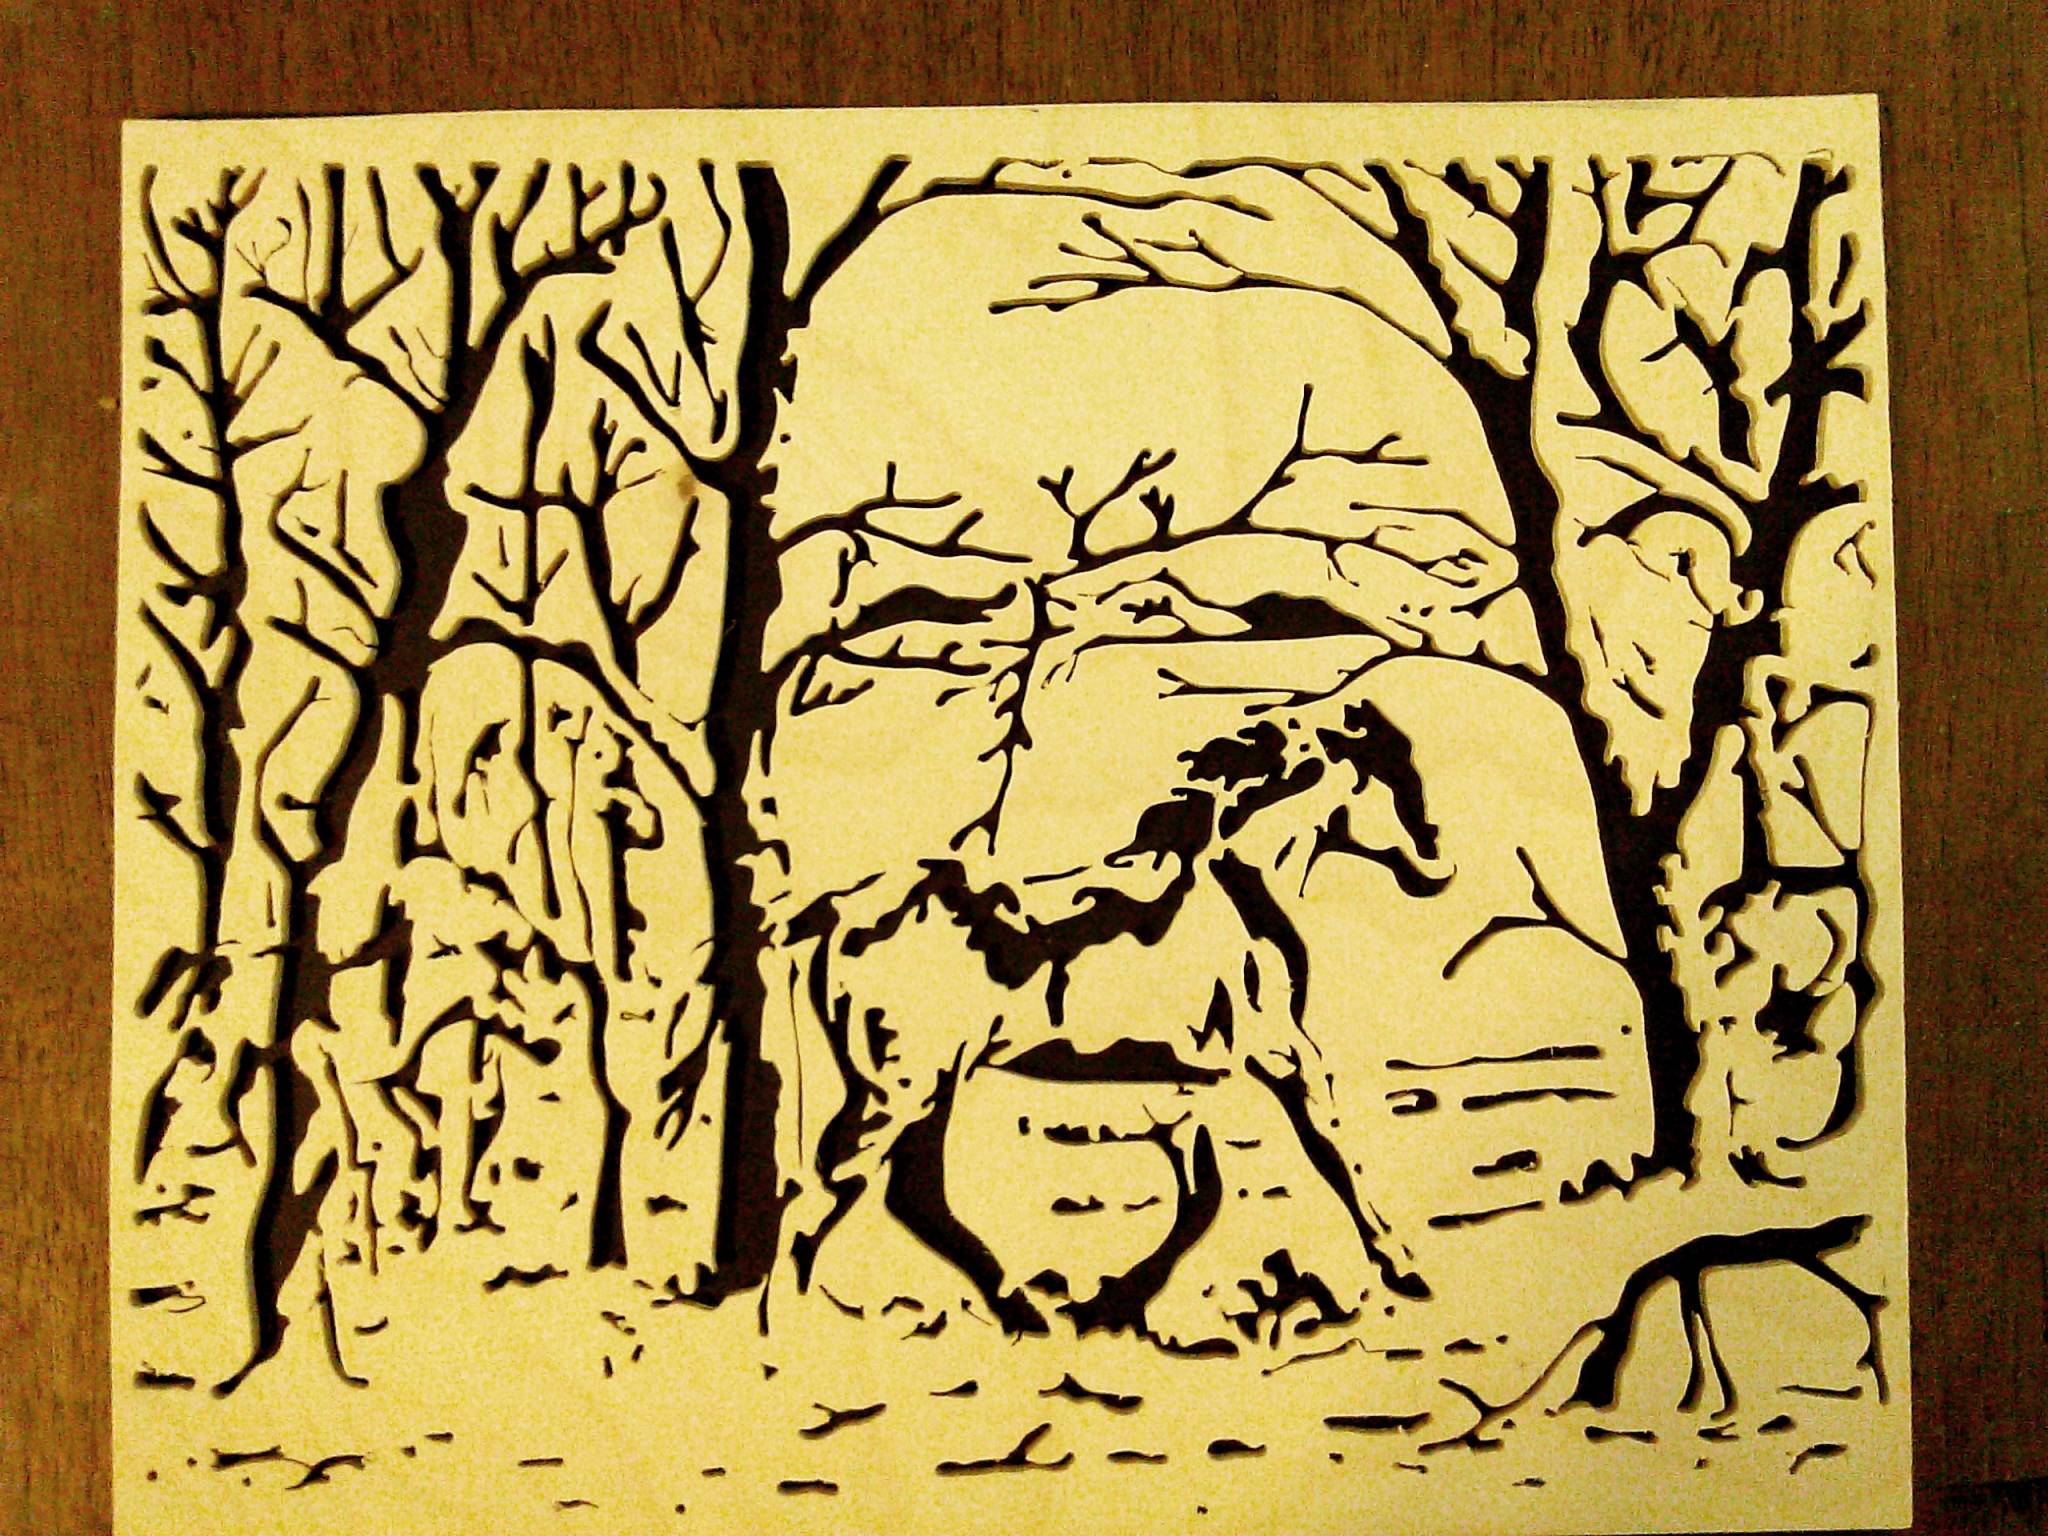 Faces in the woods